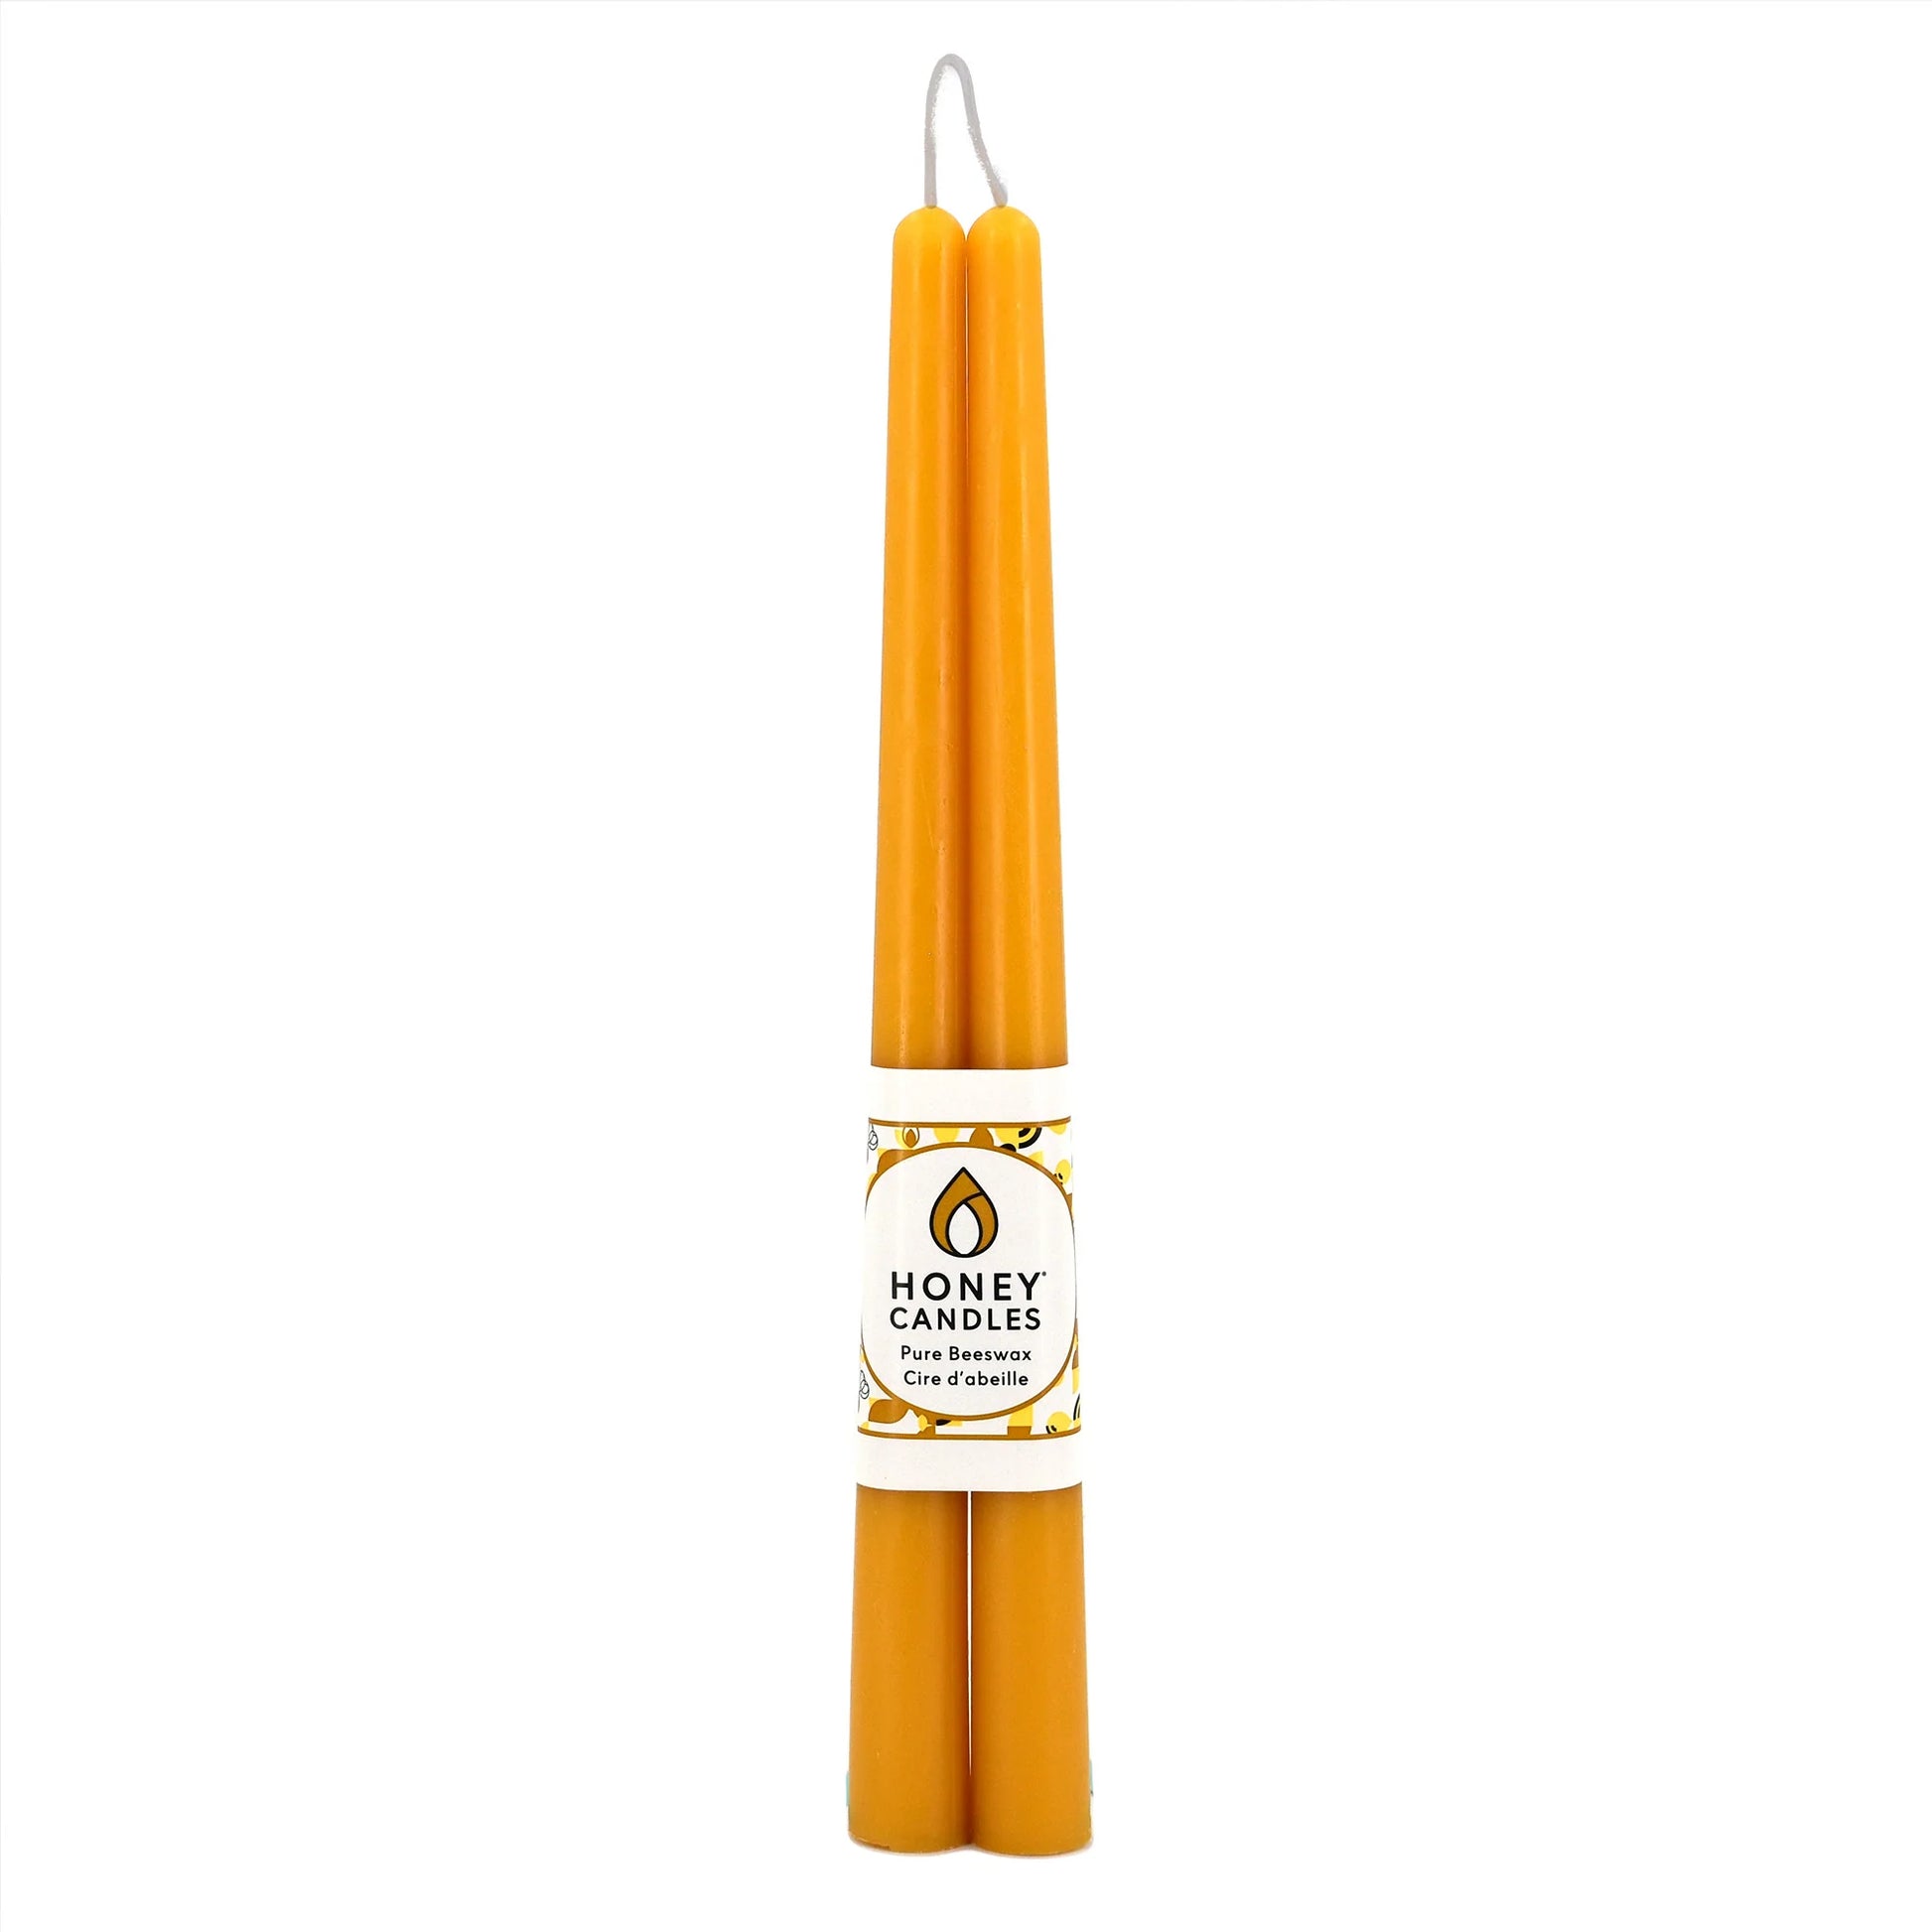 Pair of 12 Inch Natural Beeswax Taper Candles